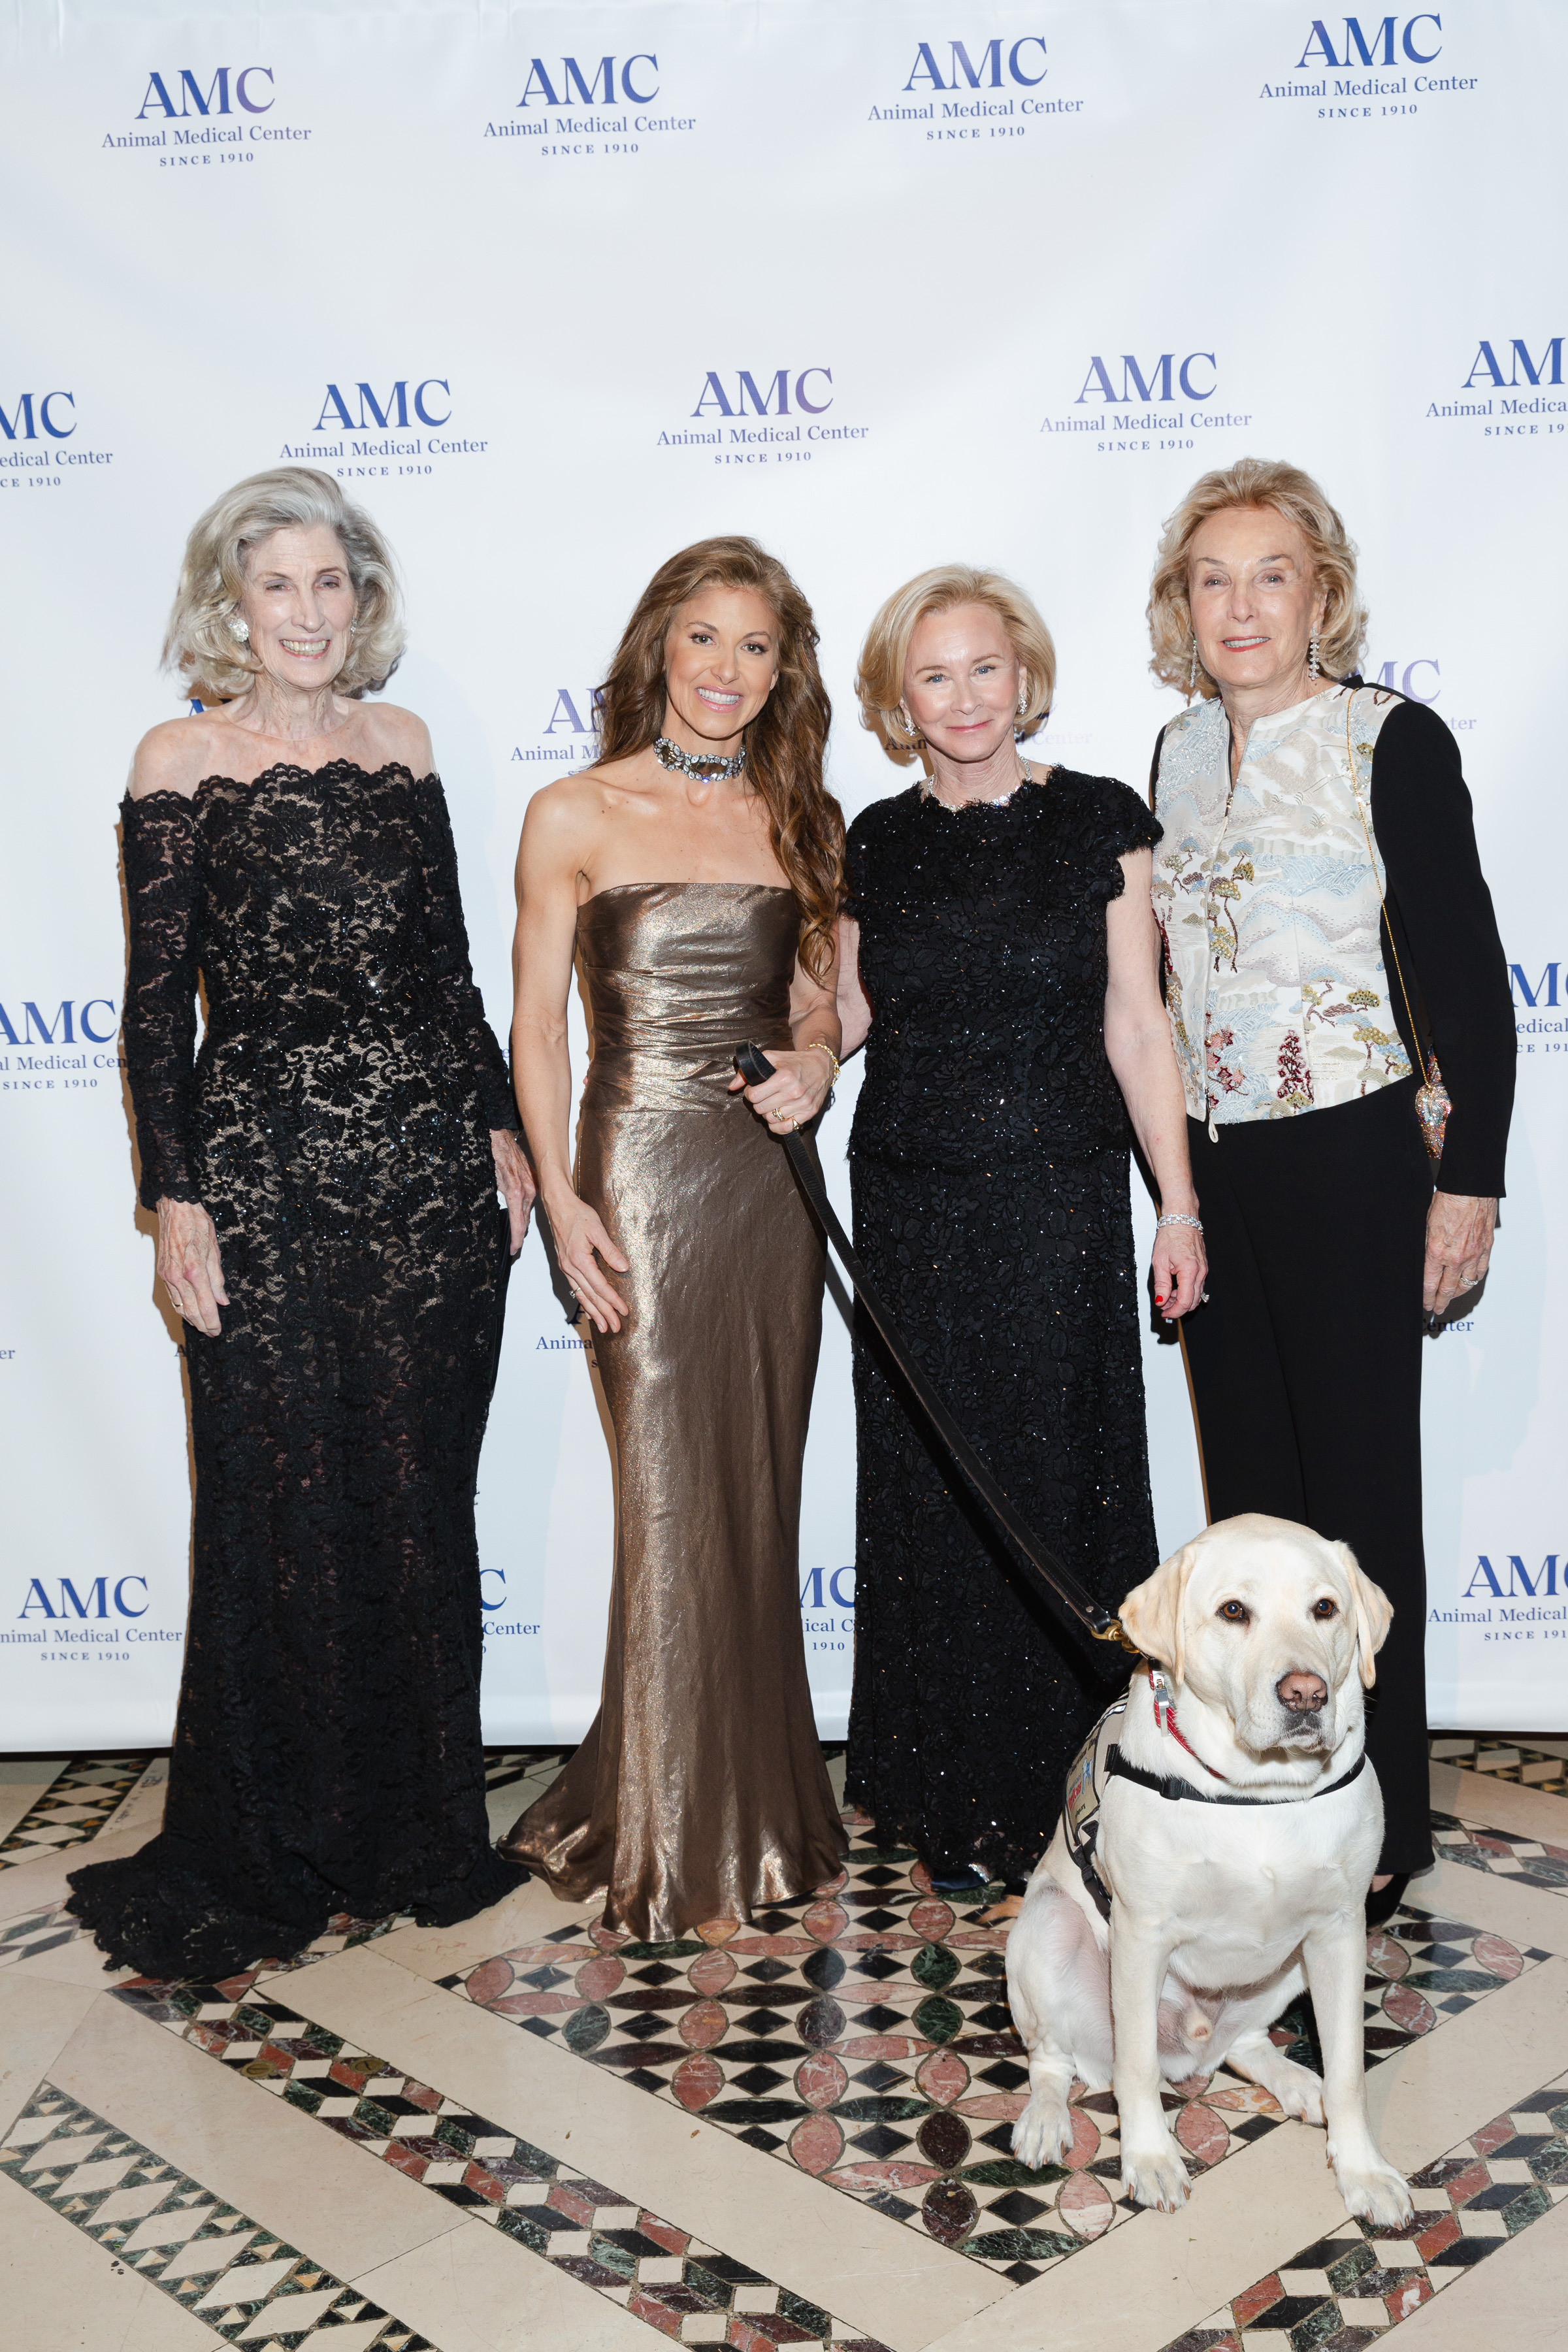 Dylan Lauren and service dog Sully H.W. Bush pose with AMC trustees